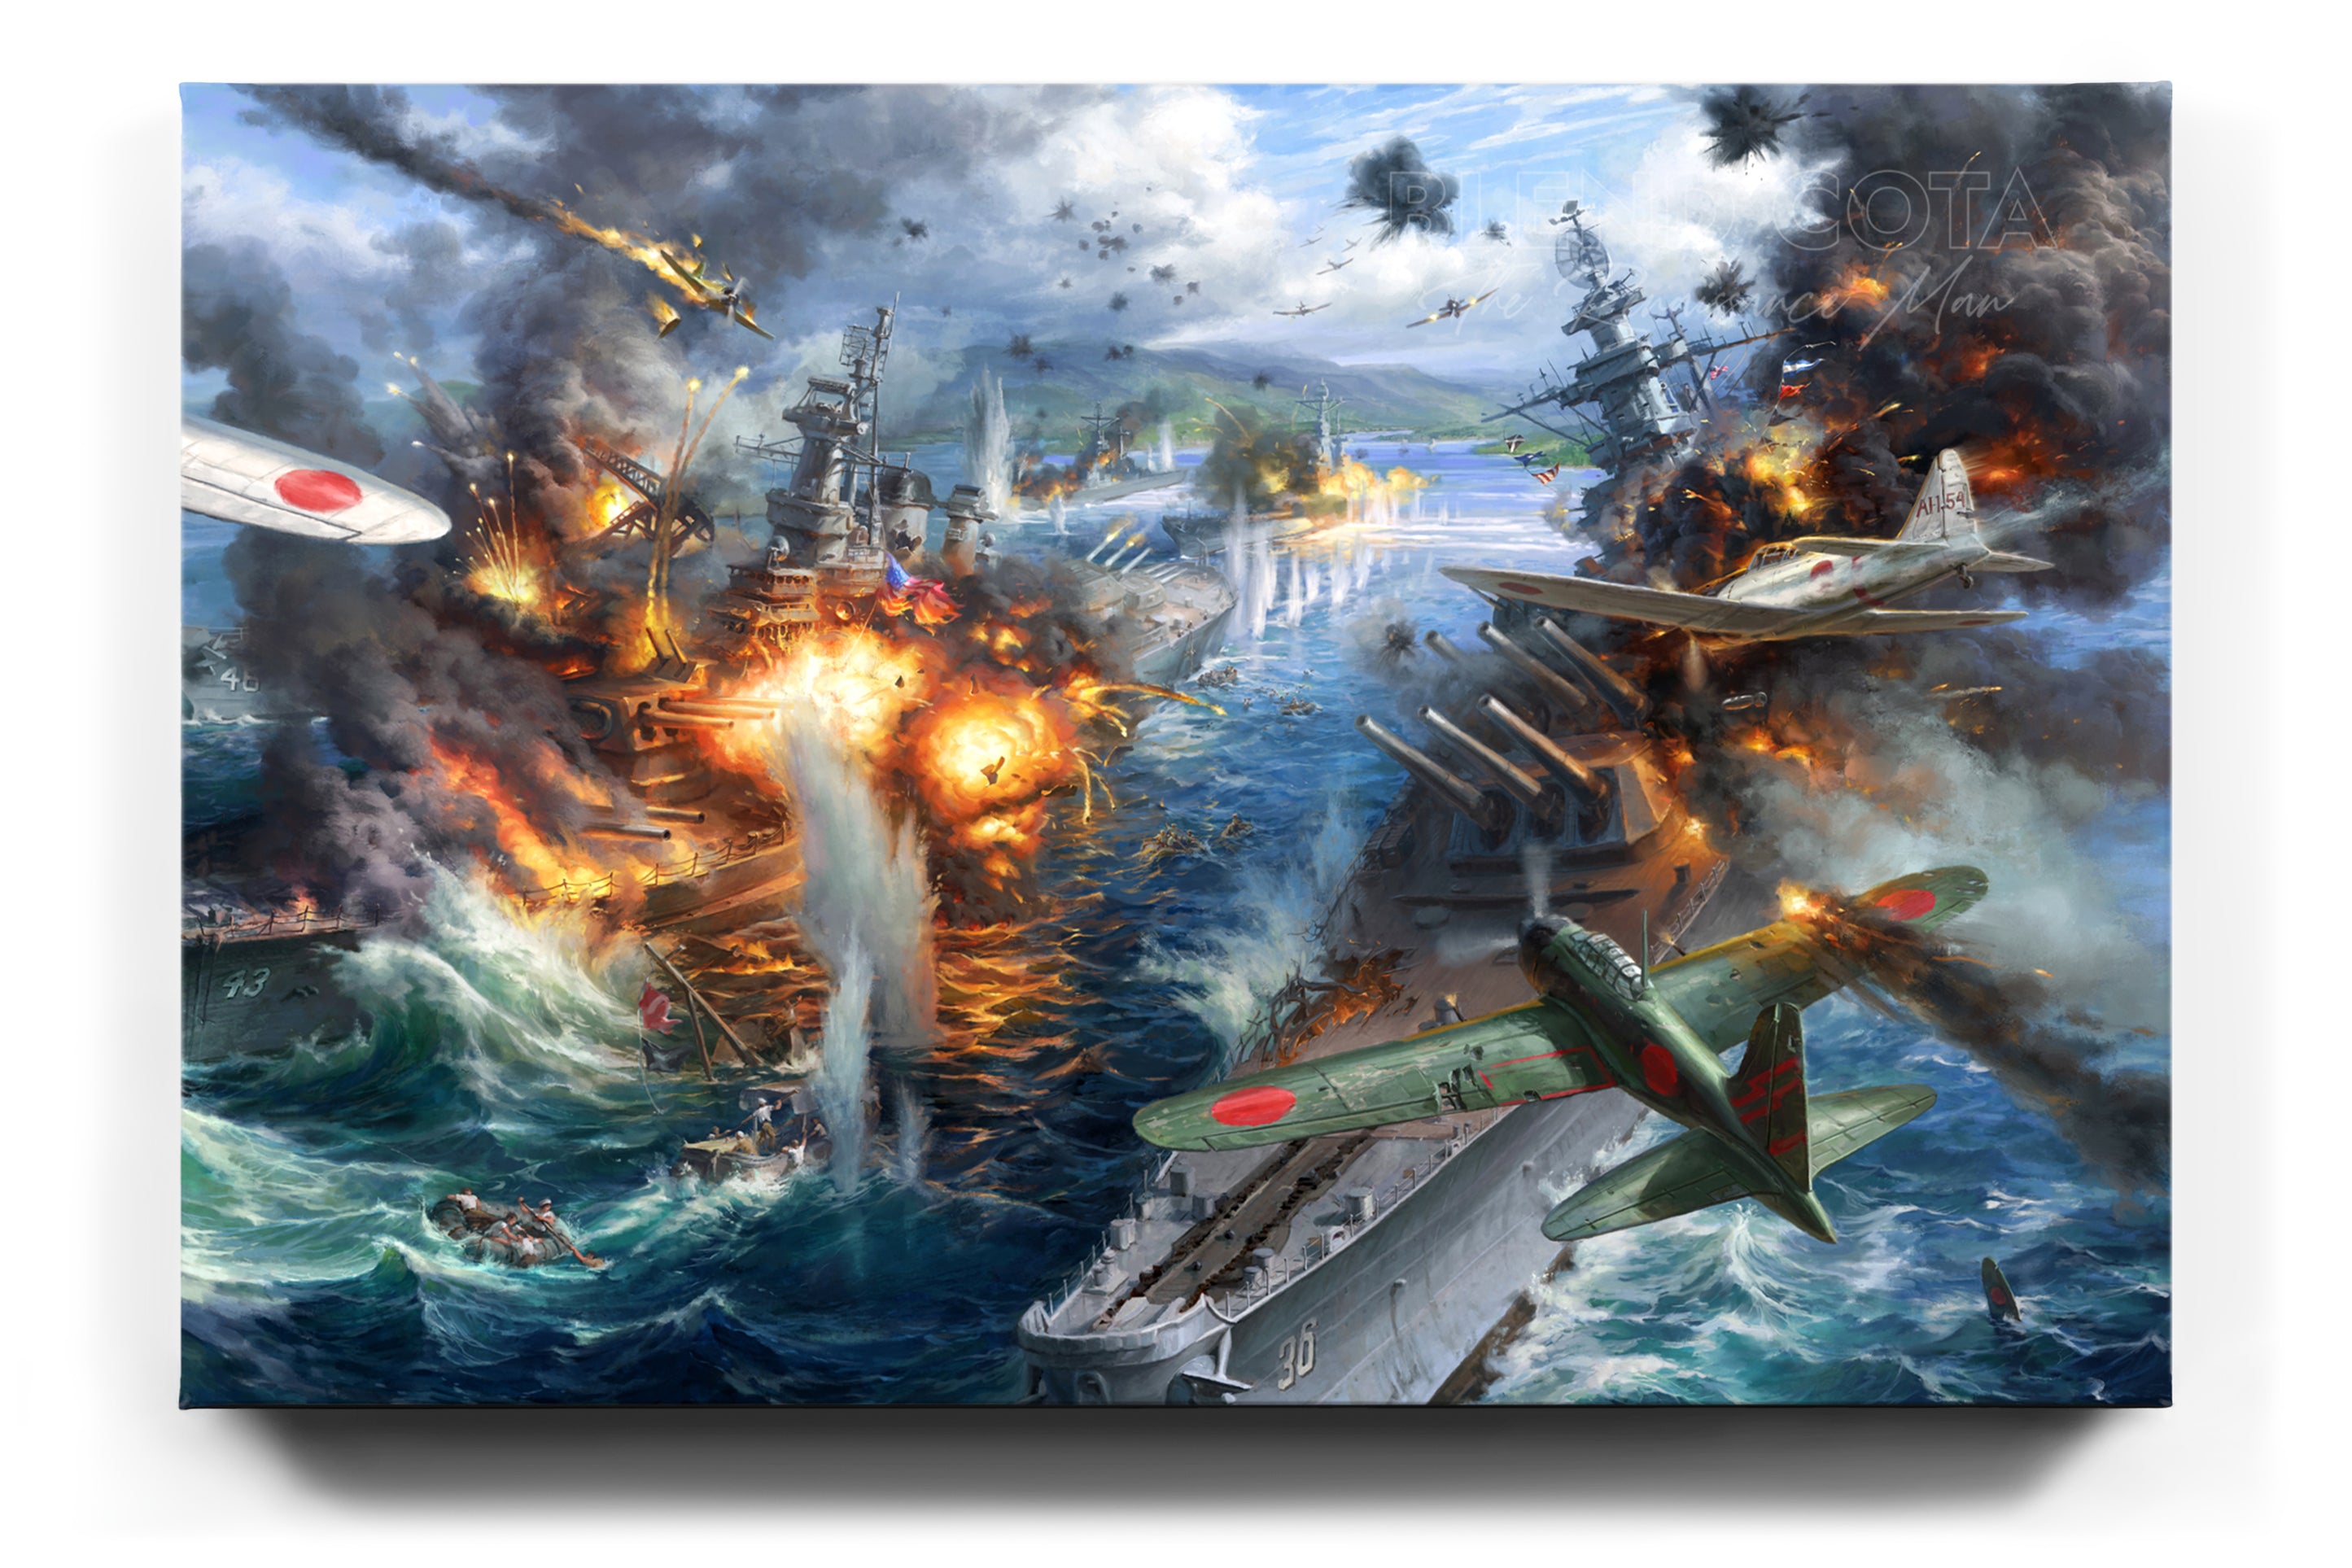 Limited edition painting on canvas of the attack on Pearl Harbor, Japanese planes bombing American battleships, on a background of destruction, smoke and fire, realism style with detailed brushstrokes.